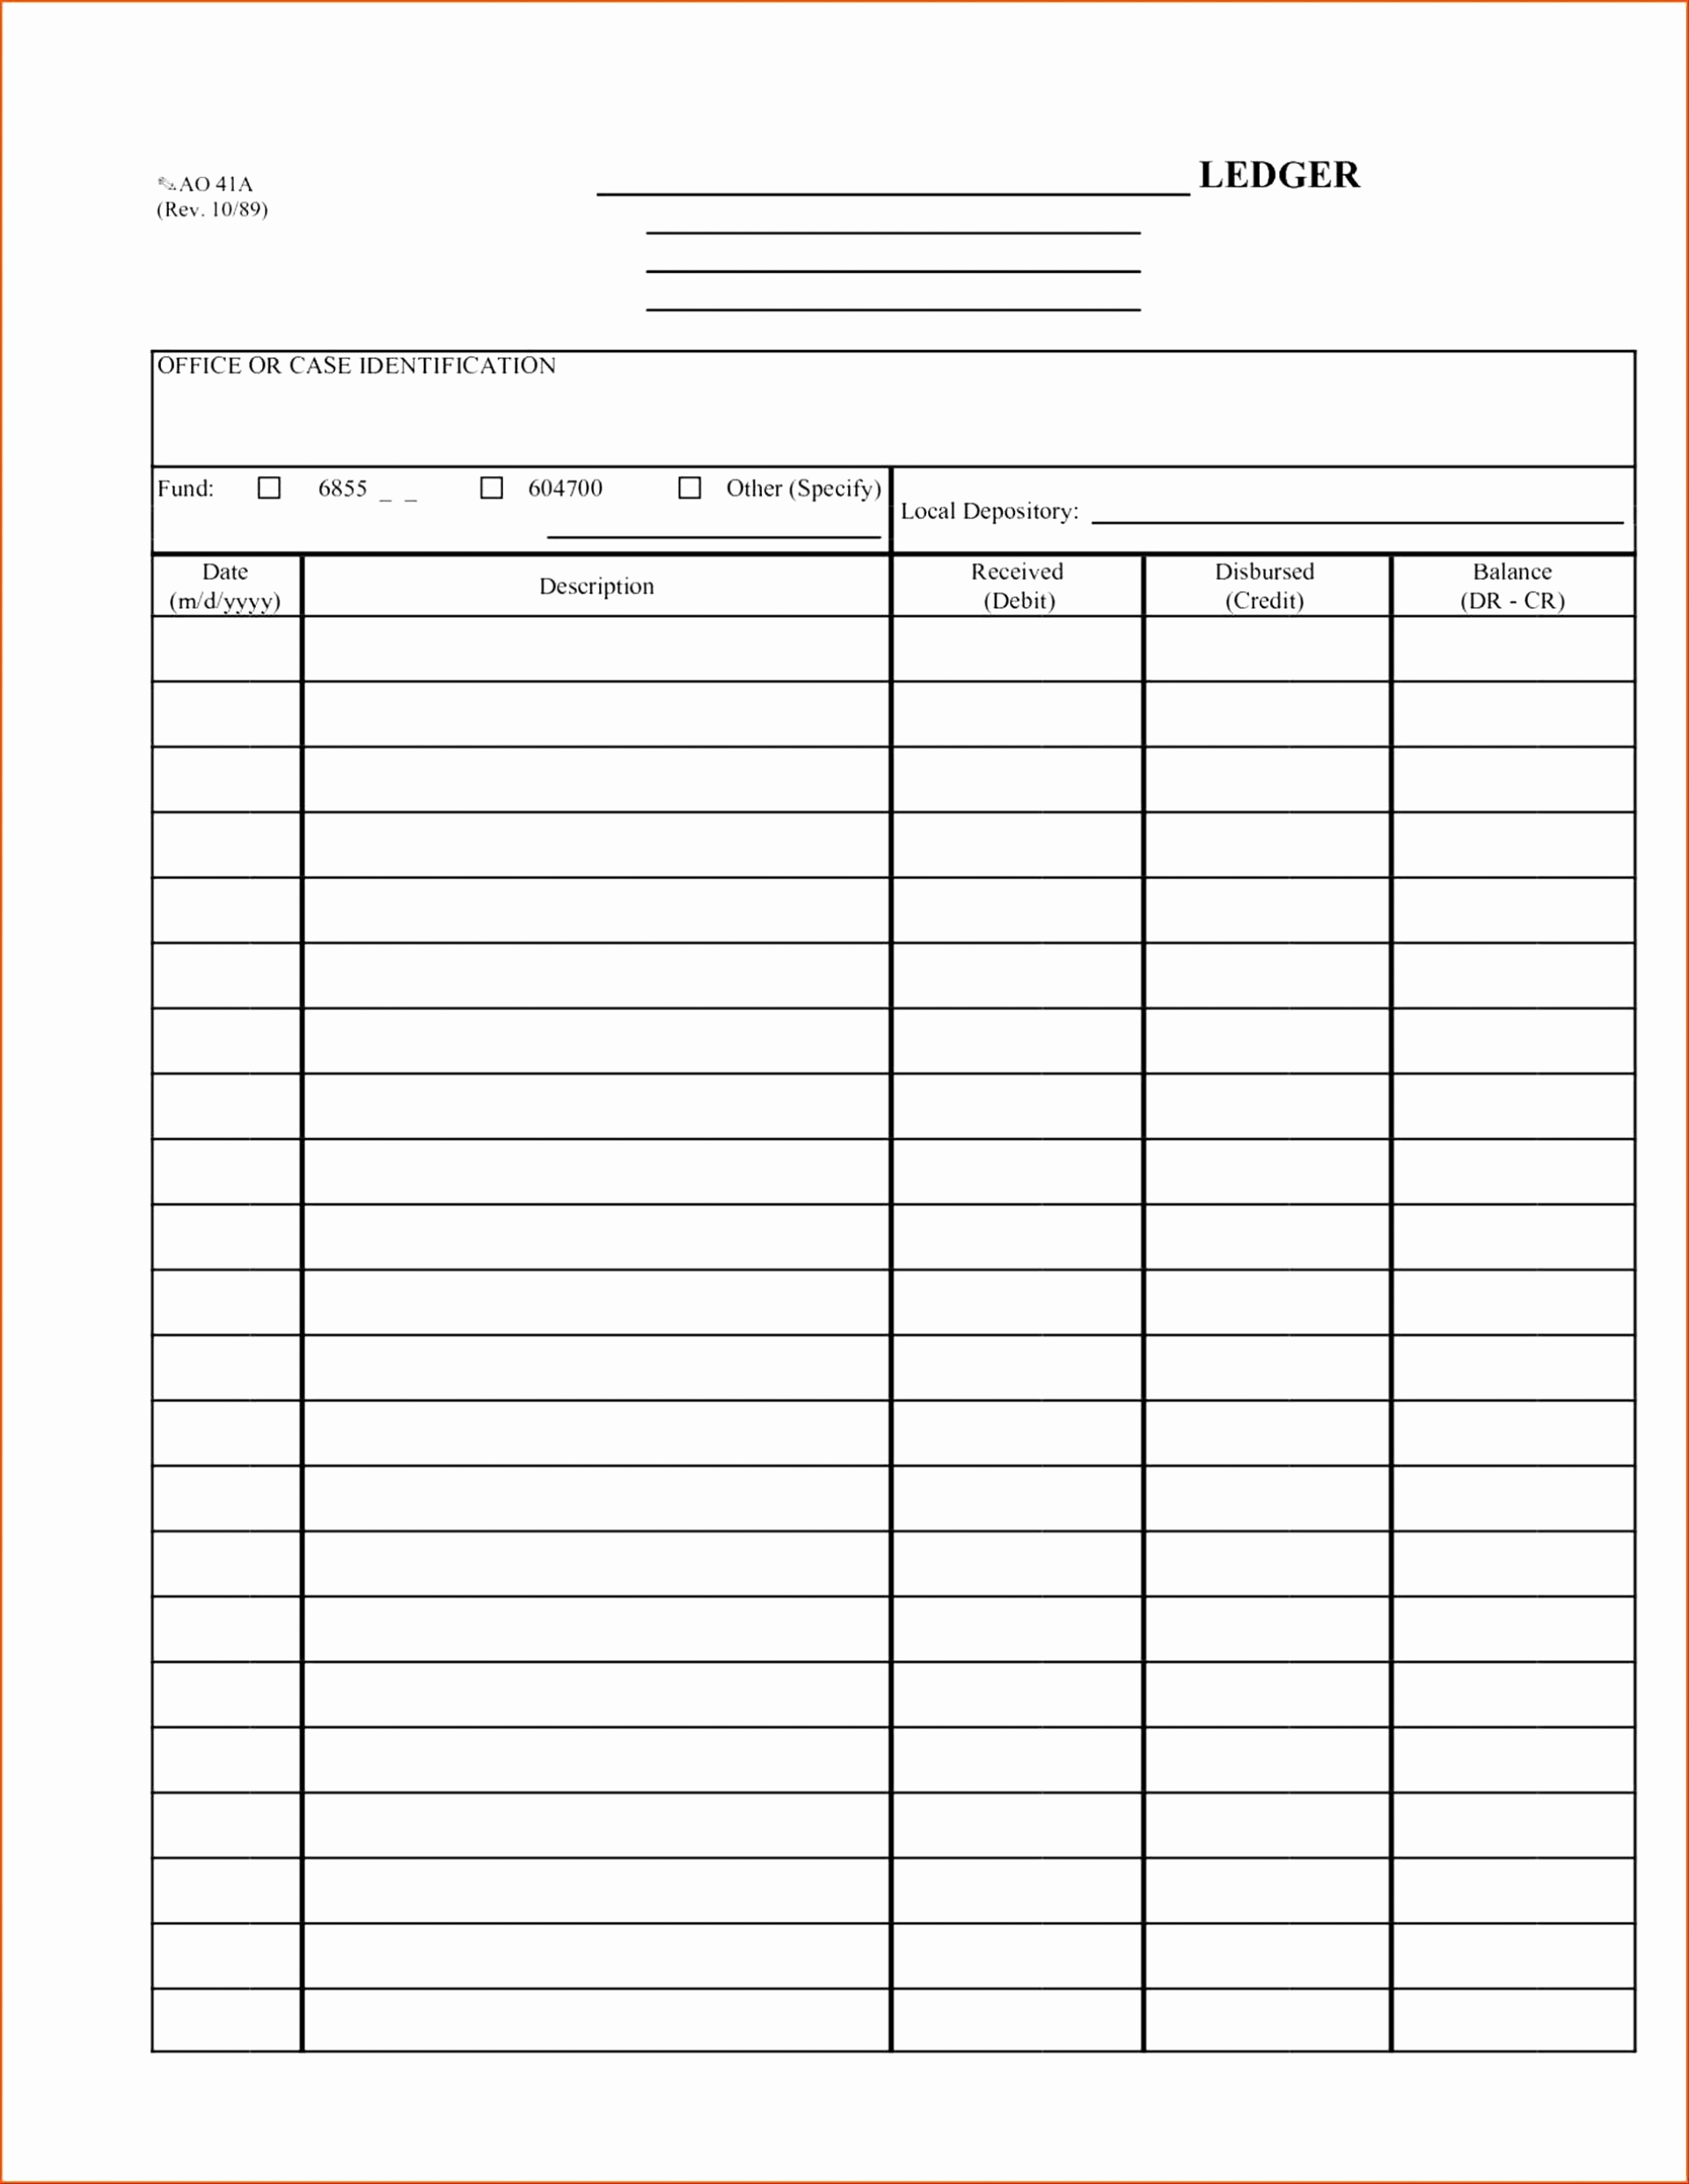 Probate Accounting Template Excel Elegant Probate Spreadsheet Template with Regard to 027 Probate